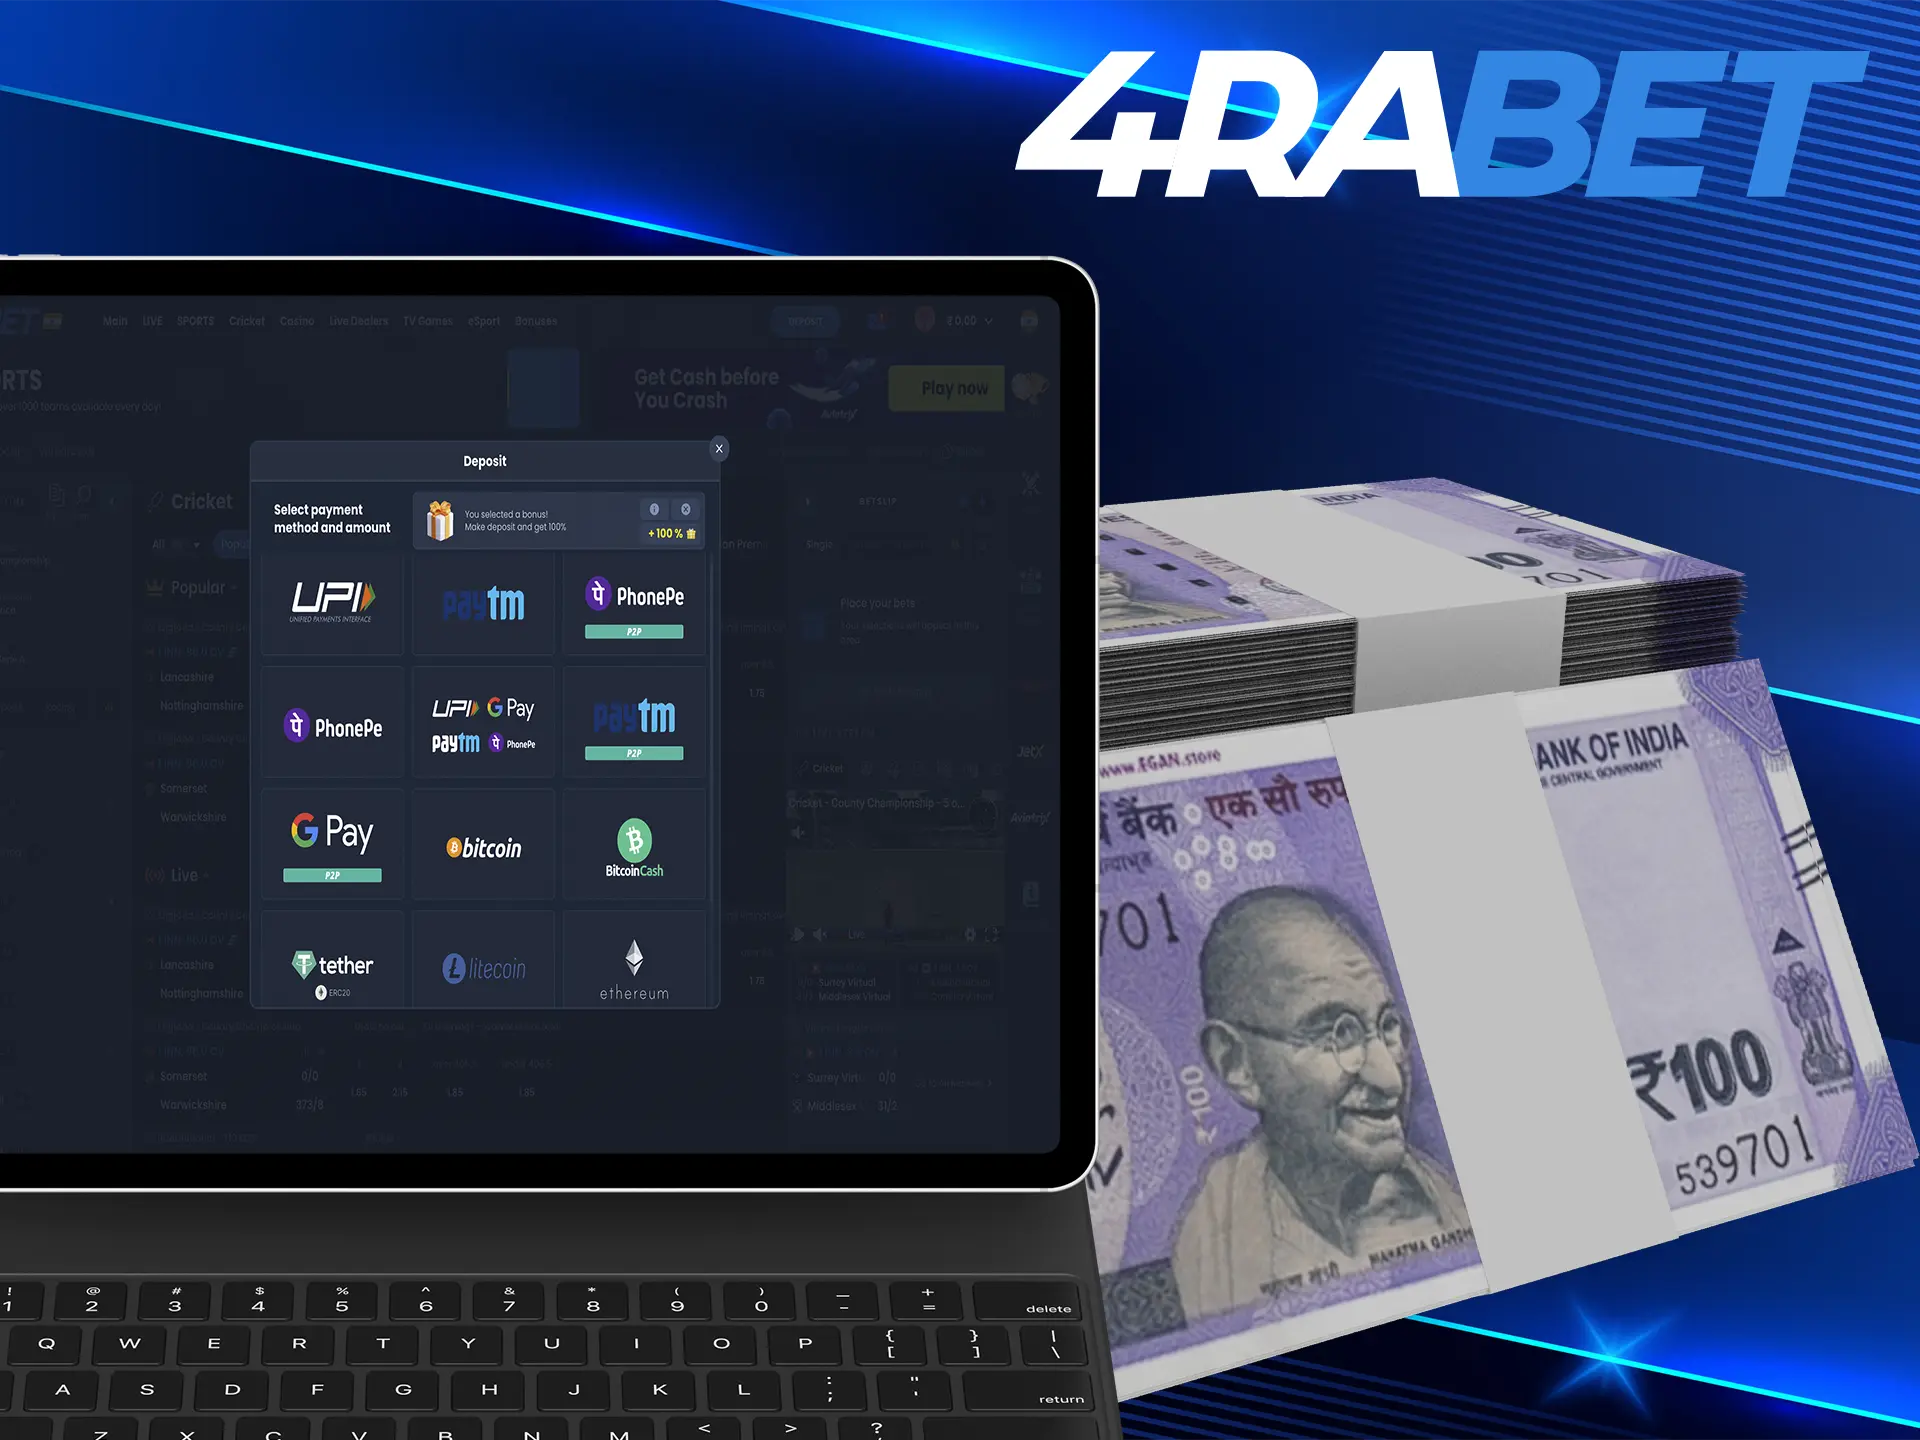 4rabet offers its users the most famous and popular deposit methods.